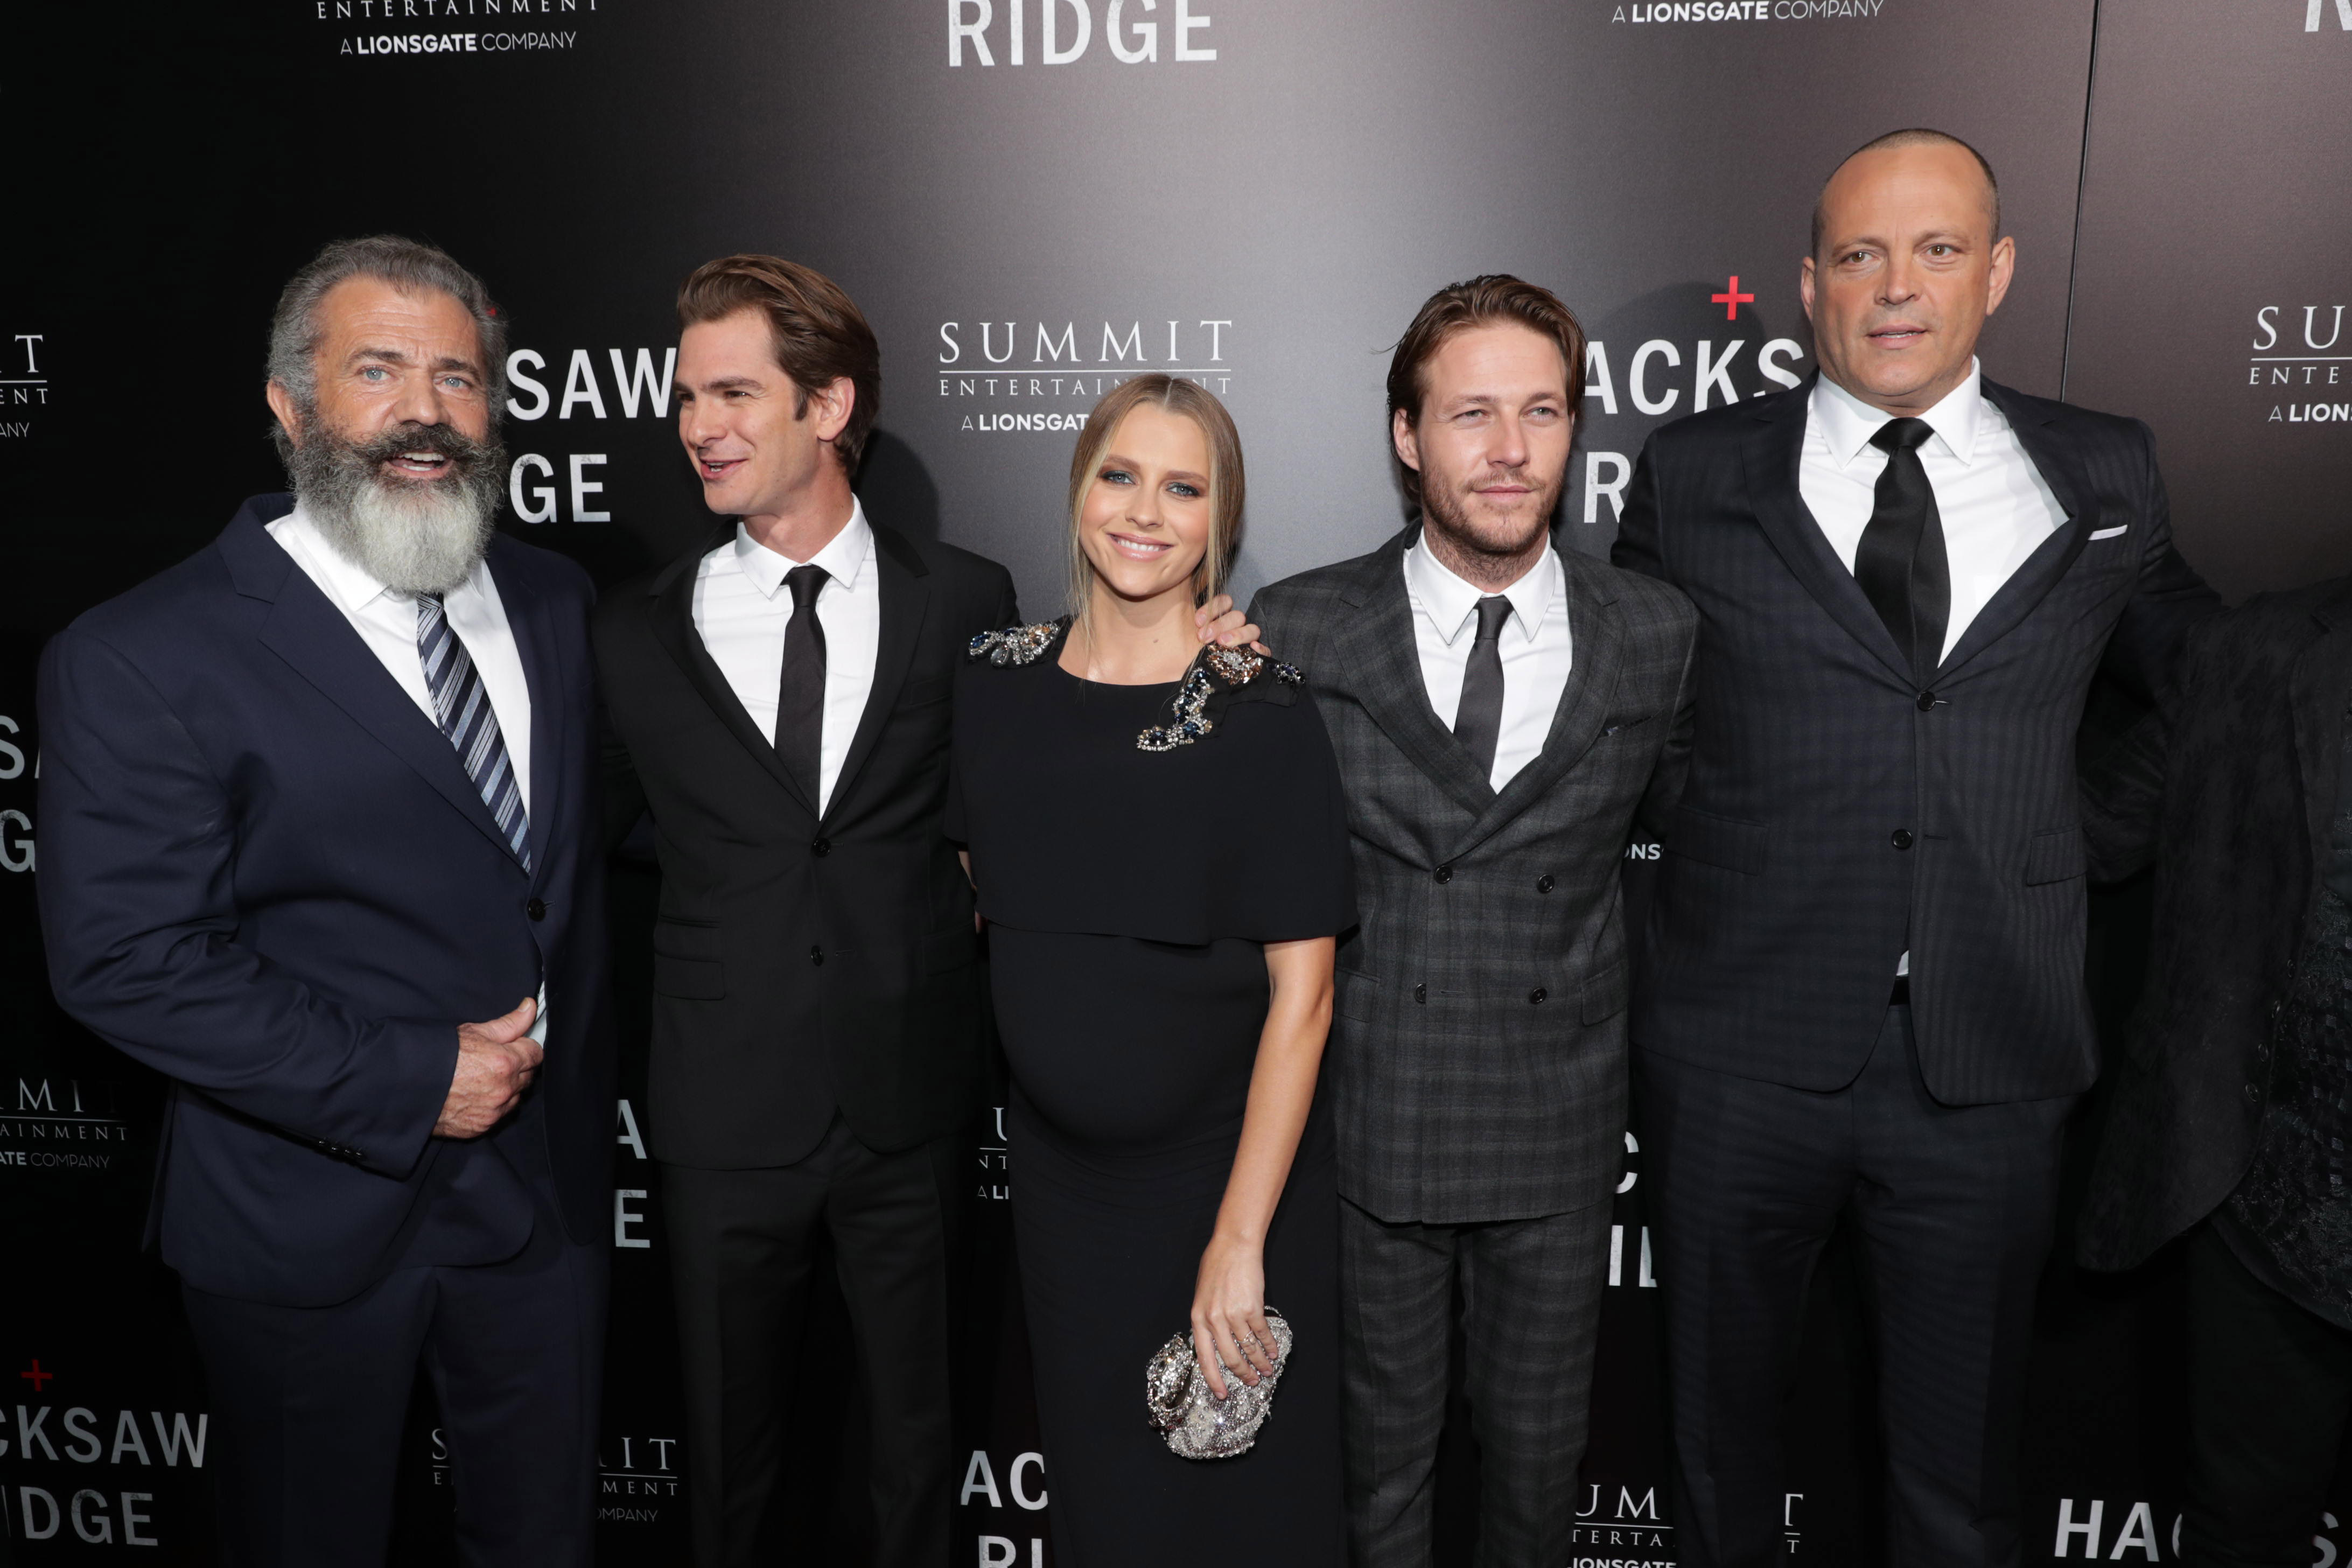 Director Mel Gibson, Andrew Garfield, Teresa Palmer, Luke Bracey and Vince Vaughn seen at Summit Entertainment, a Lionsgate Company, Los Angeles Special Screening of "Hacksaw Ridge" at The Academy’s Samuel Goldwyn Theater on Monday, Oct. 24, 2016, in Beverly Hills, Calif. (Photo by Eric Charbonneau/Invision for Lionsgate/AP Images)